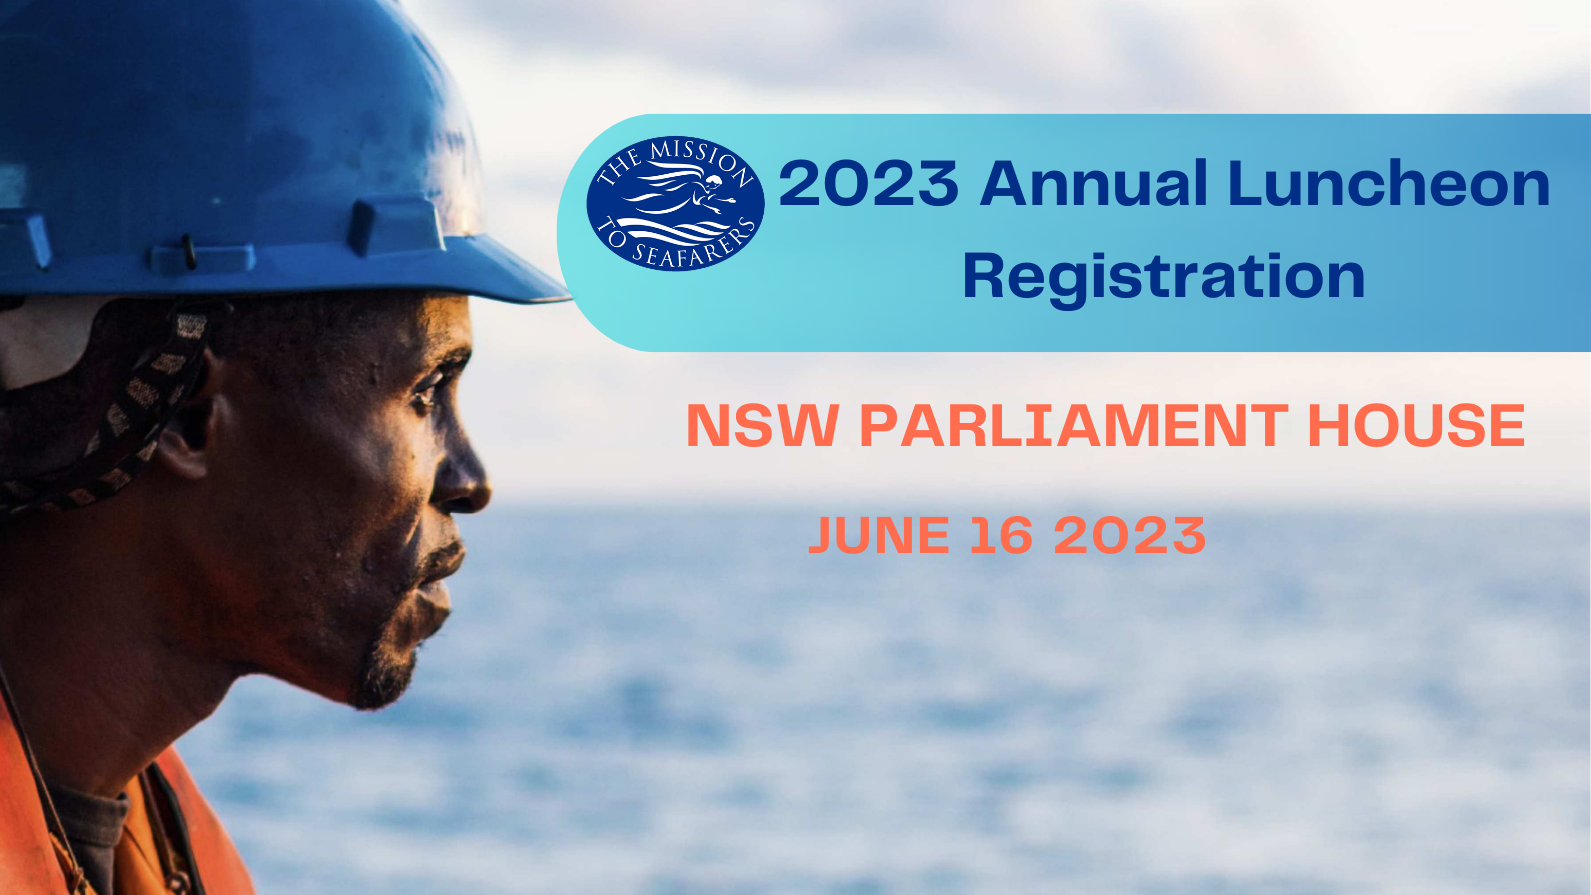 Mission to Seafarers 2023 Annual Luncheon